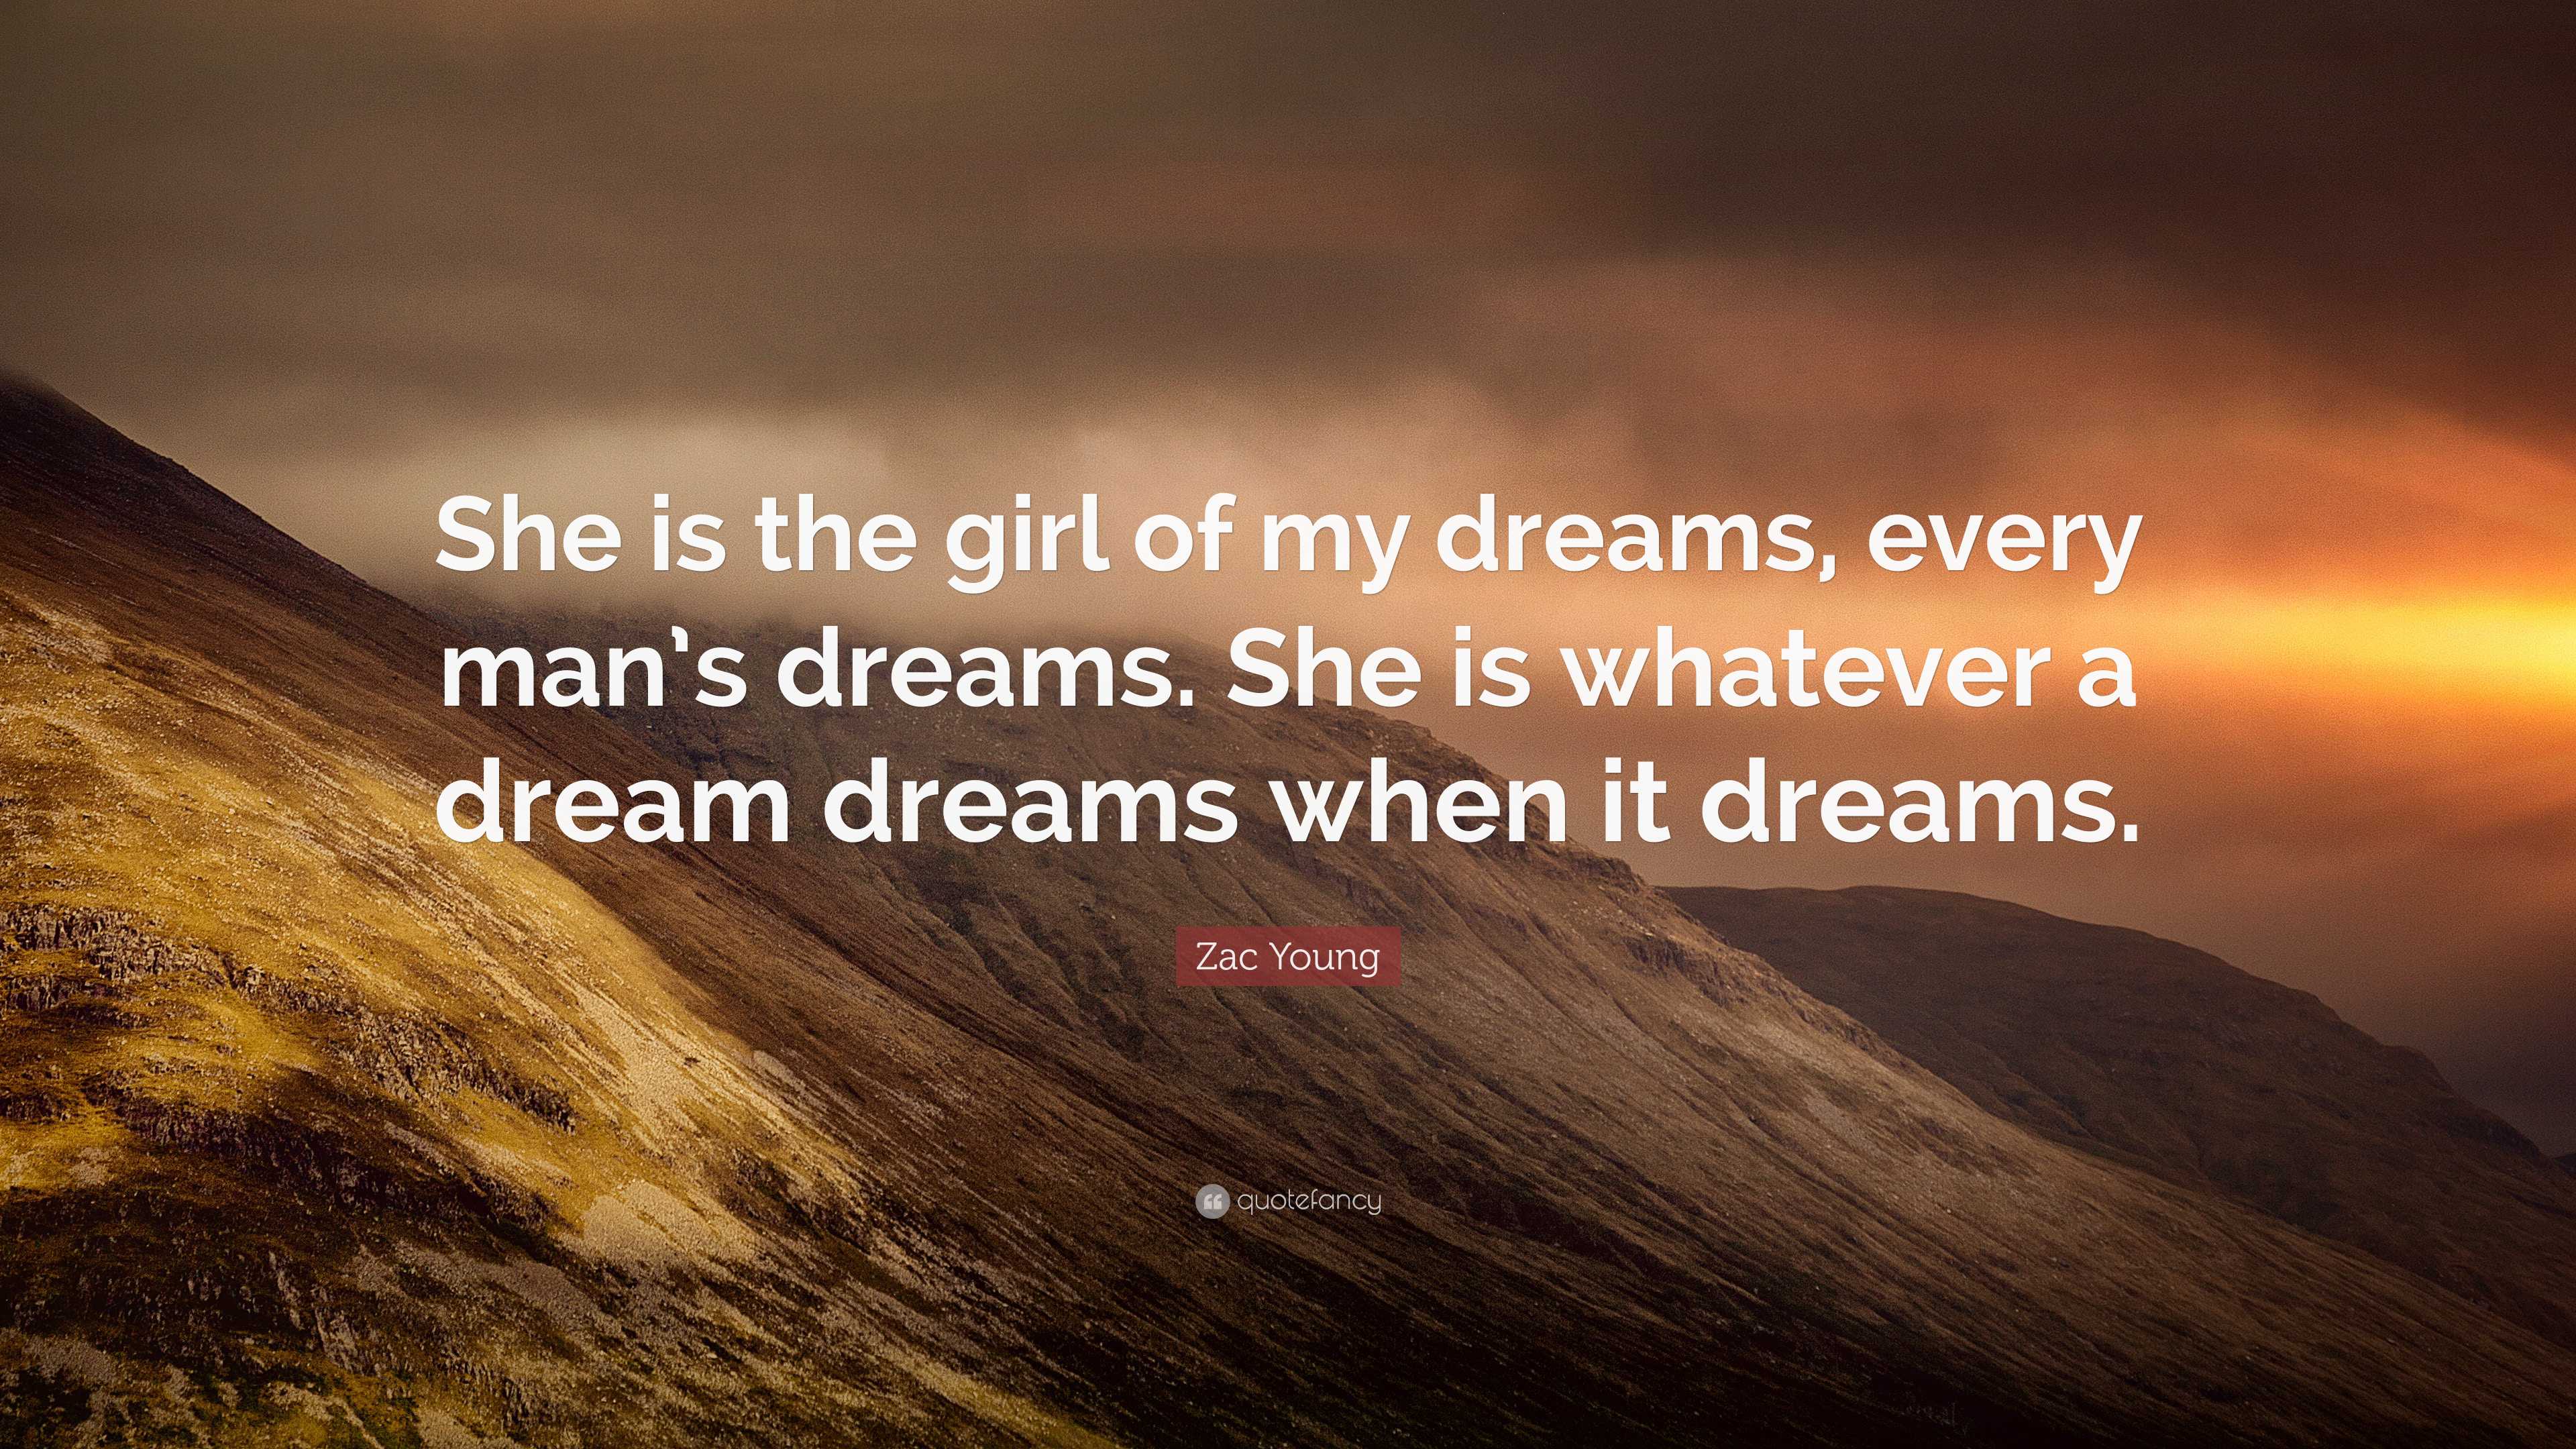 Zac Young Quote: “She is the girl of my dreams, every man's dreams